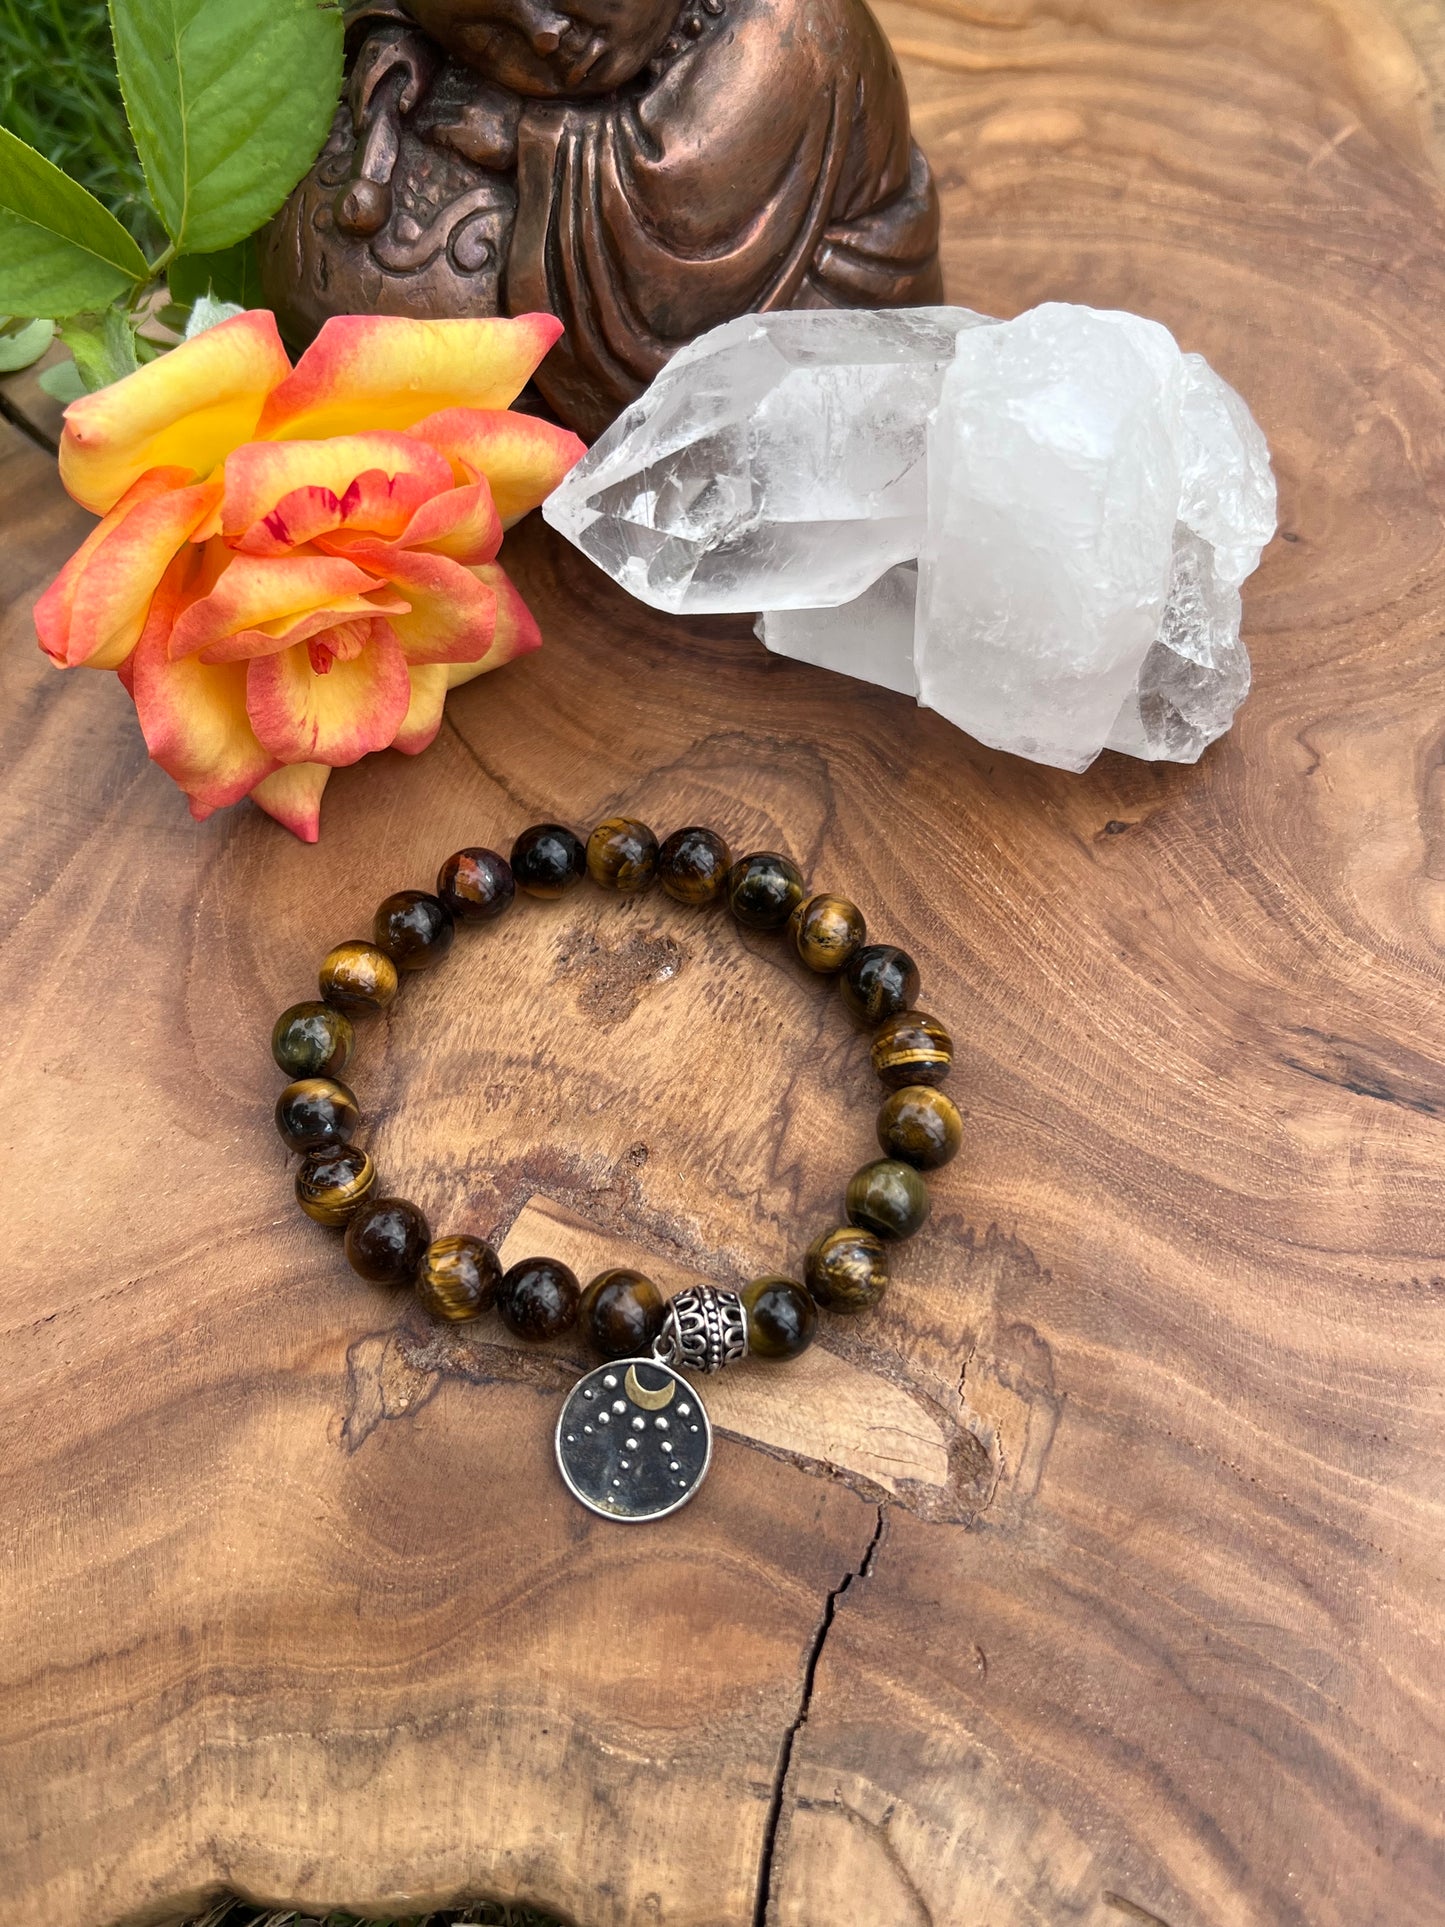 Tiger’s Eye Bracelet with a Crescent Moon charm